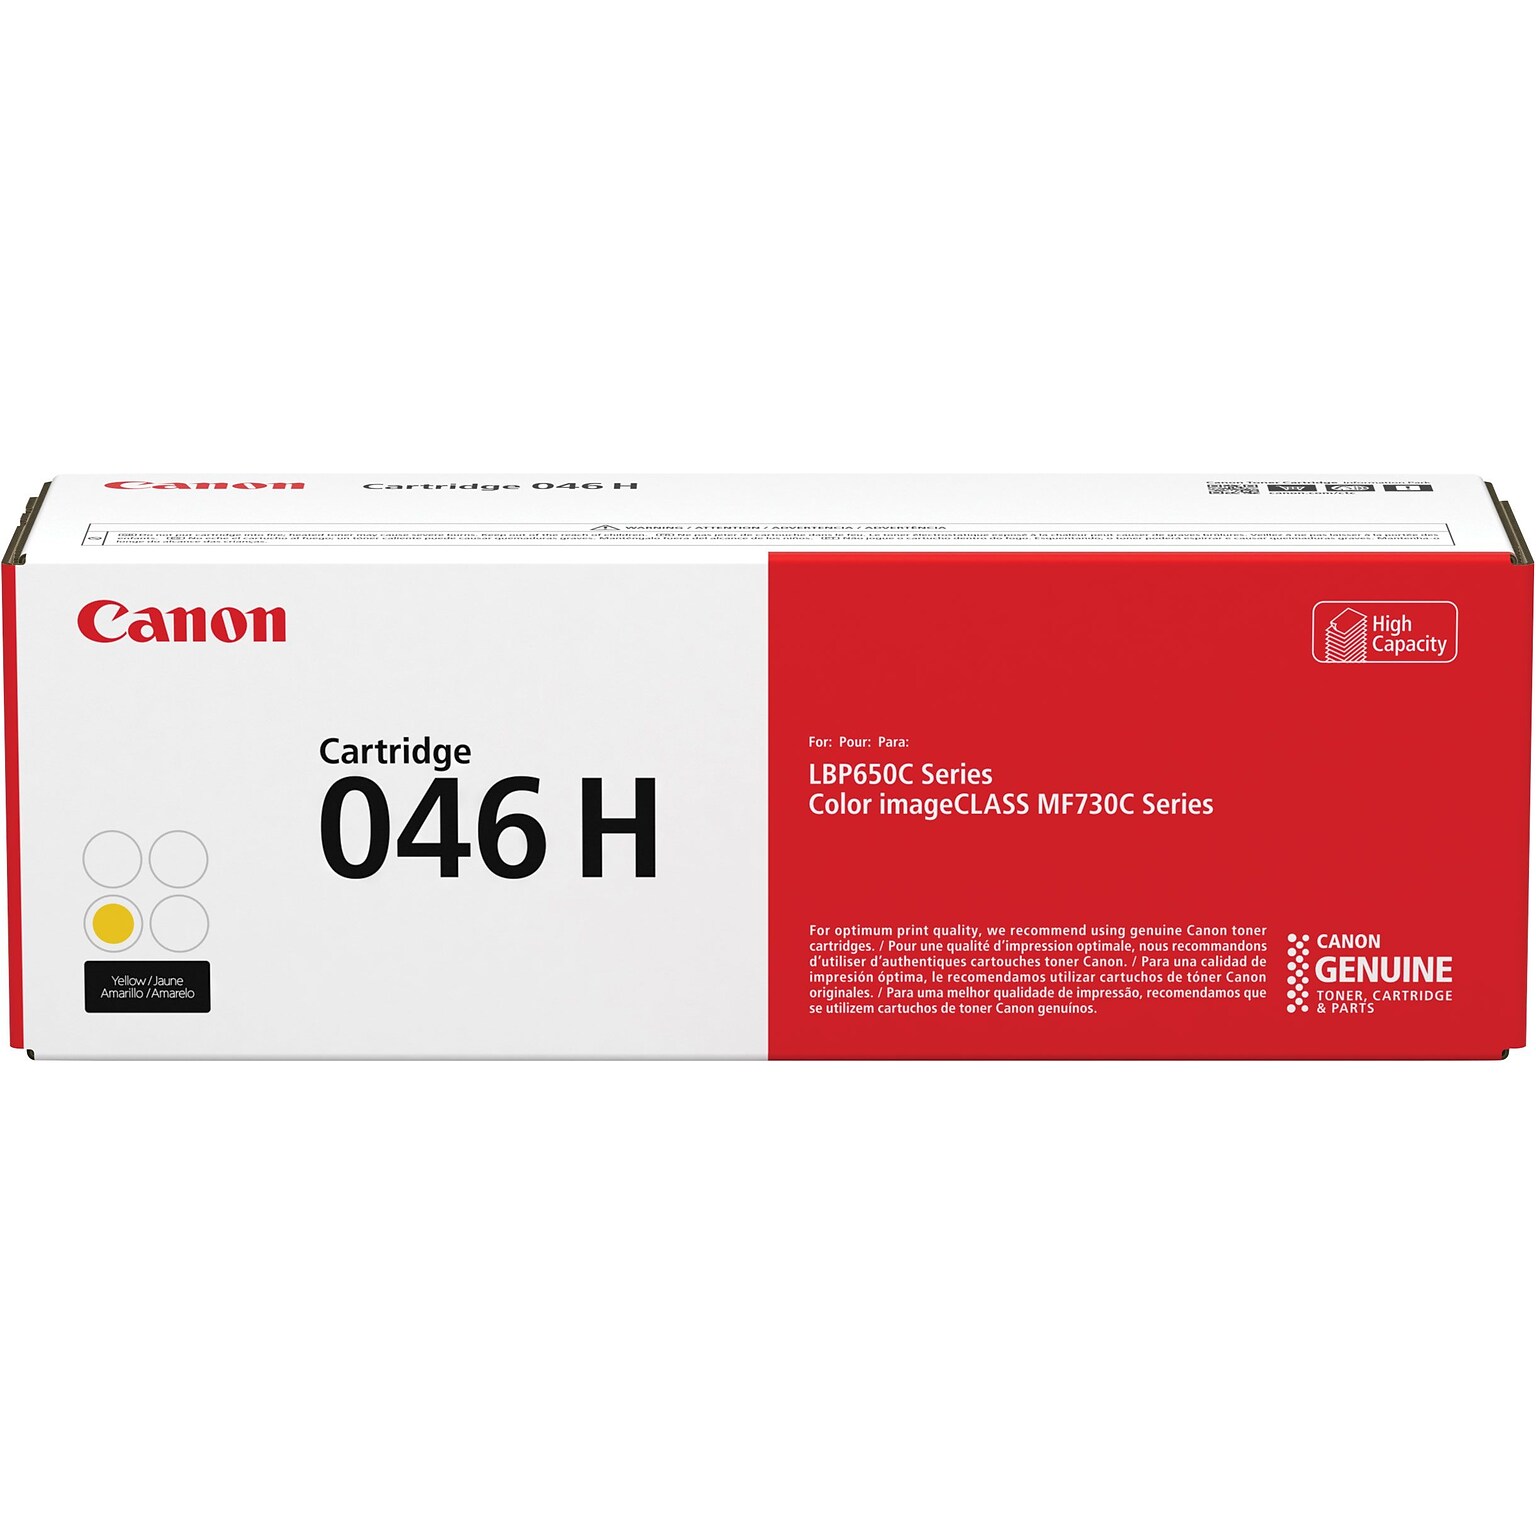 Canon 046 H Yellow High Yield Toner Cartridge, Prints Up to 5,000 Pages (1251C001)